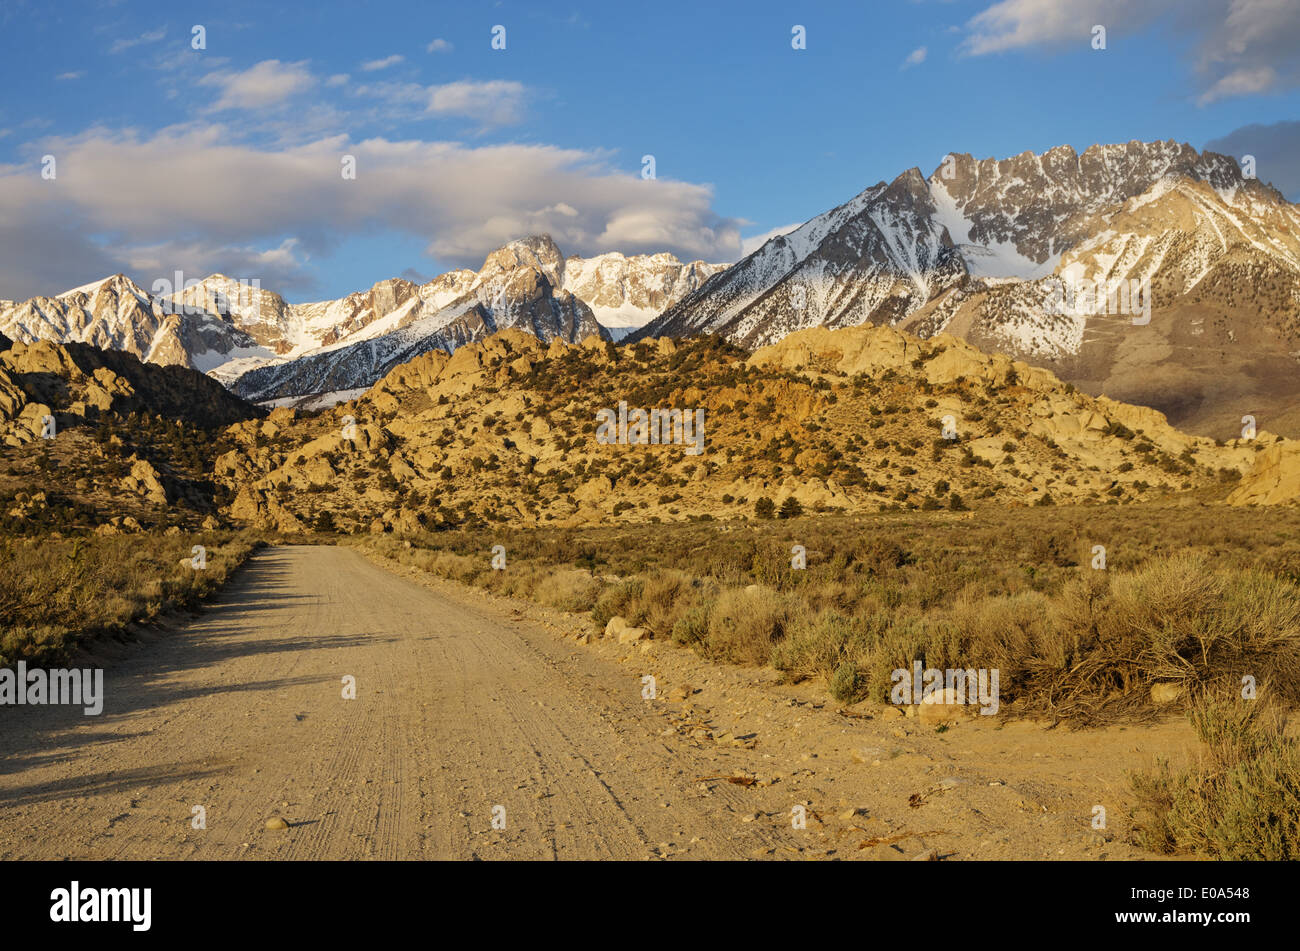 the Buttermilk dirt road heads towards the mountains of the Eastern Sierra Nevada in California early in the morning Stock Photo